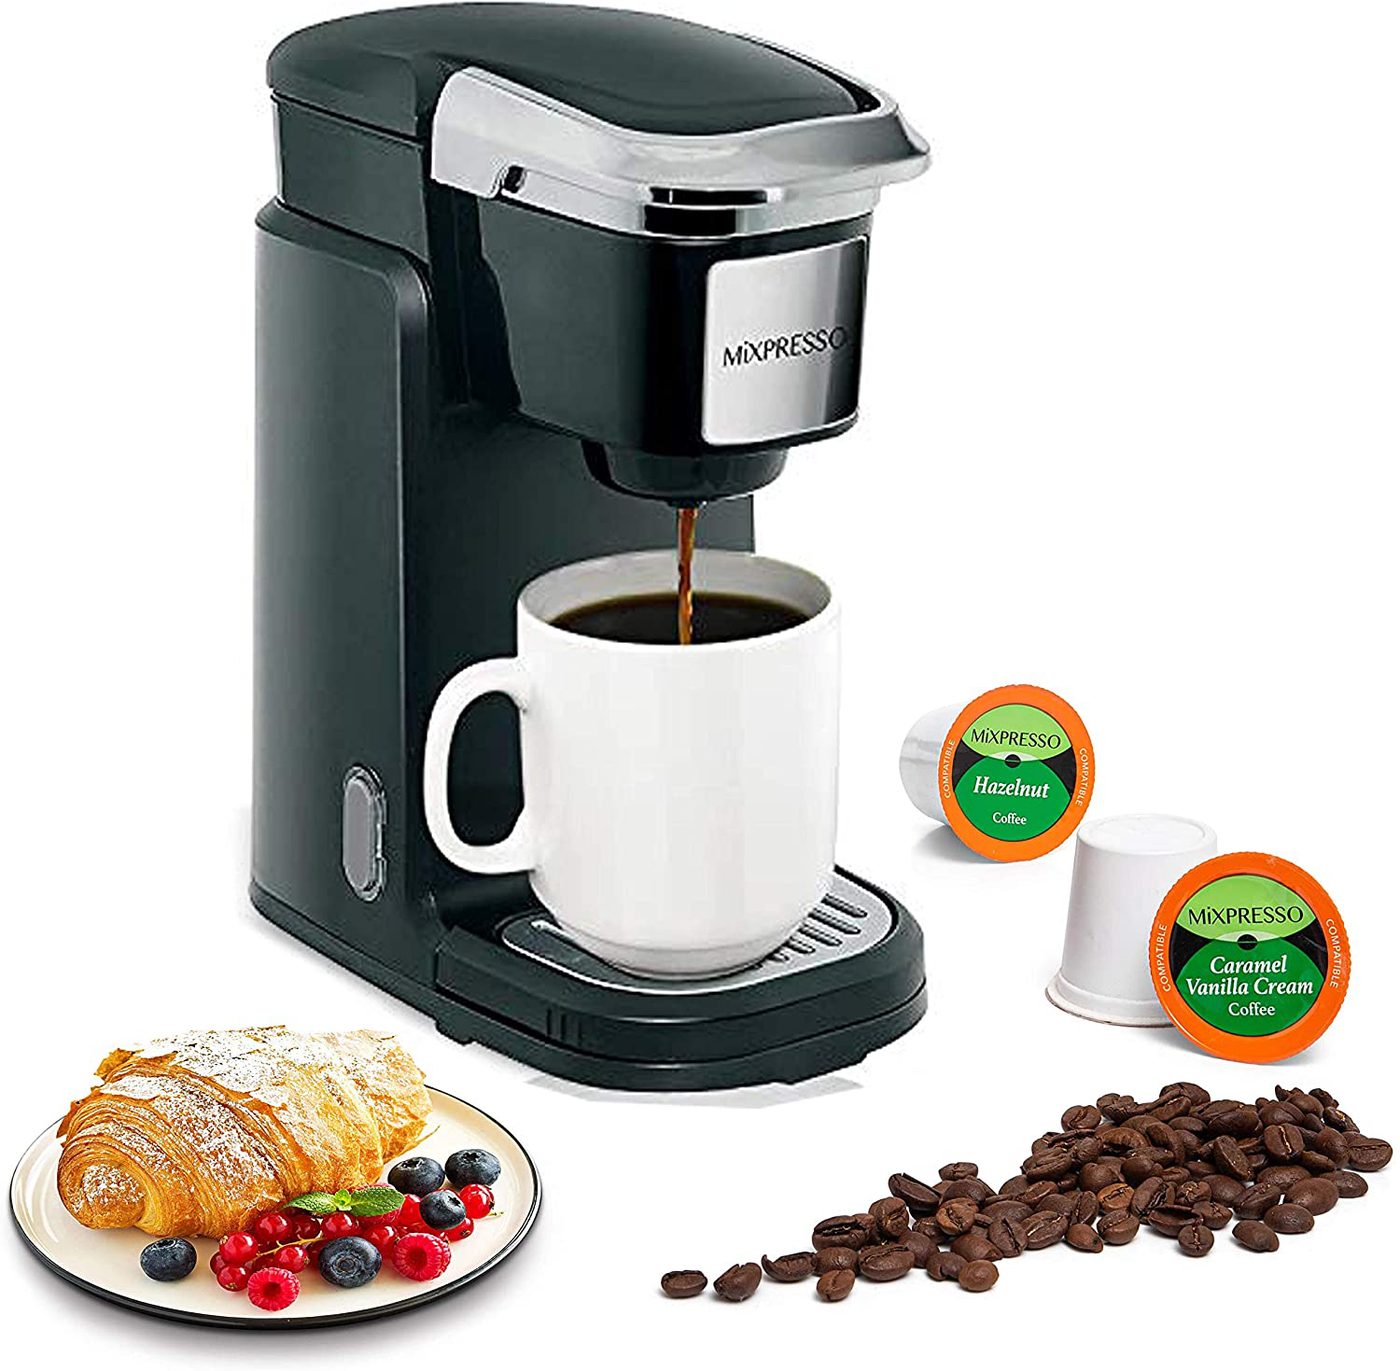 Mixpresso Single Cup Coffee Maker | Personal, Single Serve Coffee Brewer Machine, Compatible with Single-Cups | Quick Brew Technology, Programmable Features, One Touch Function (Red & Black)